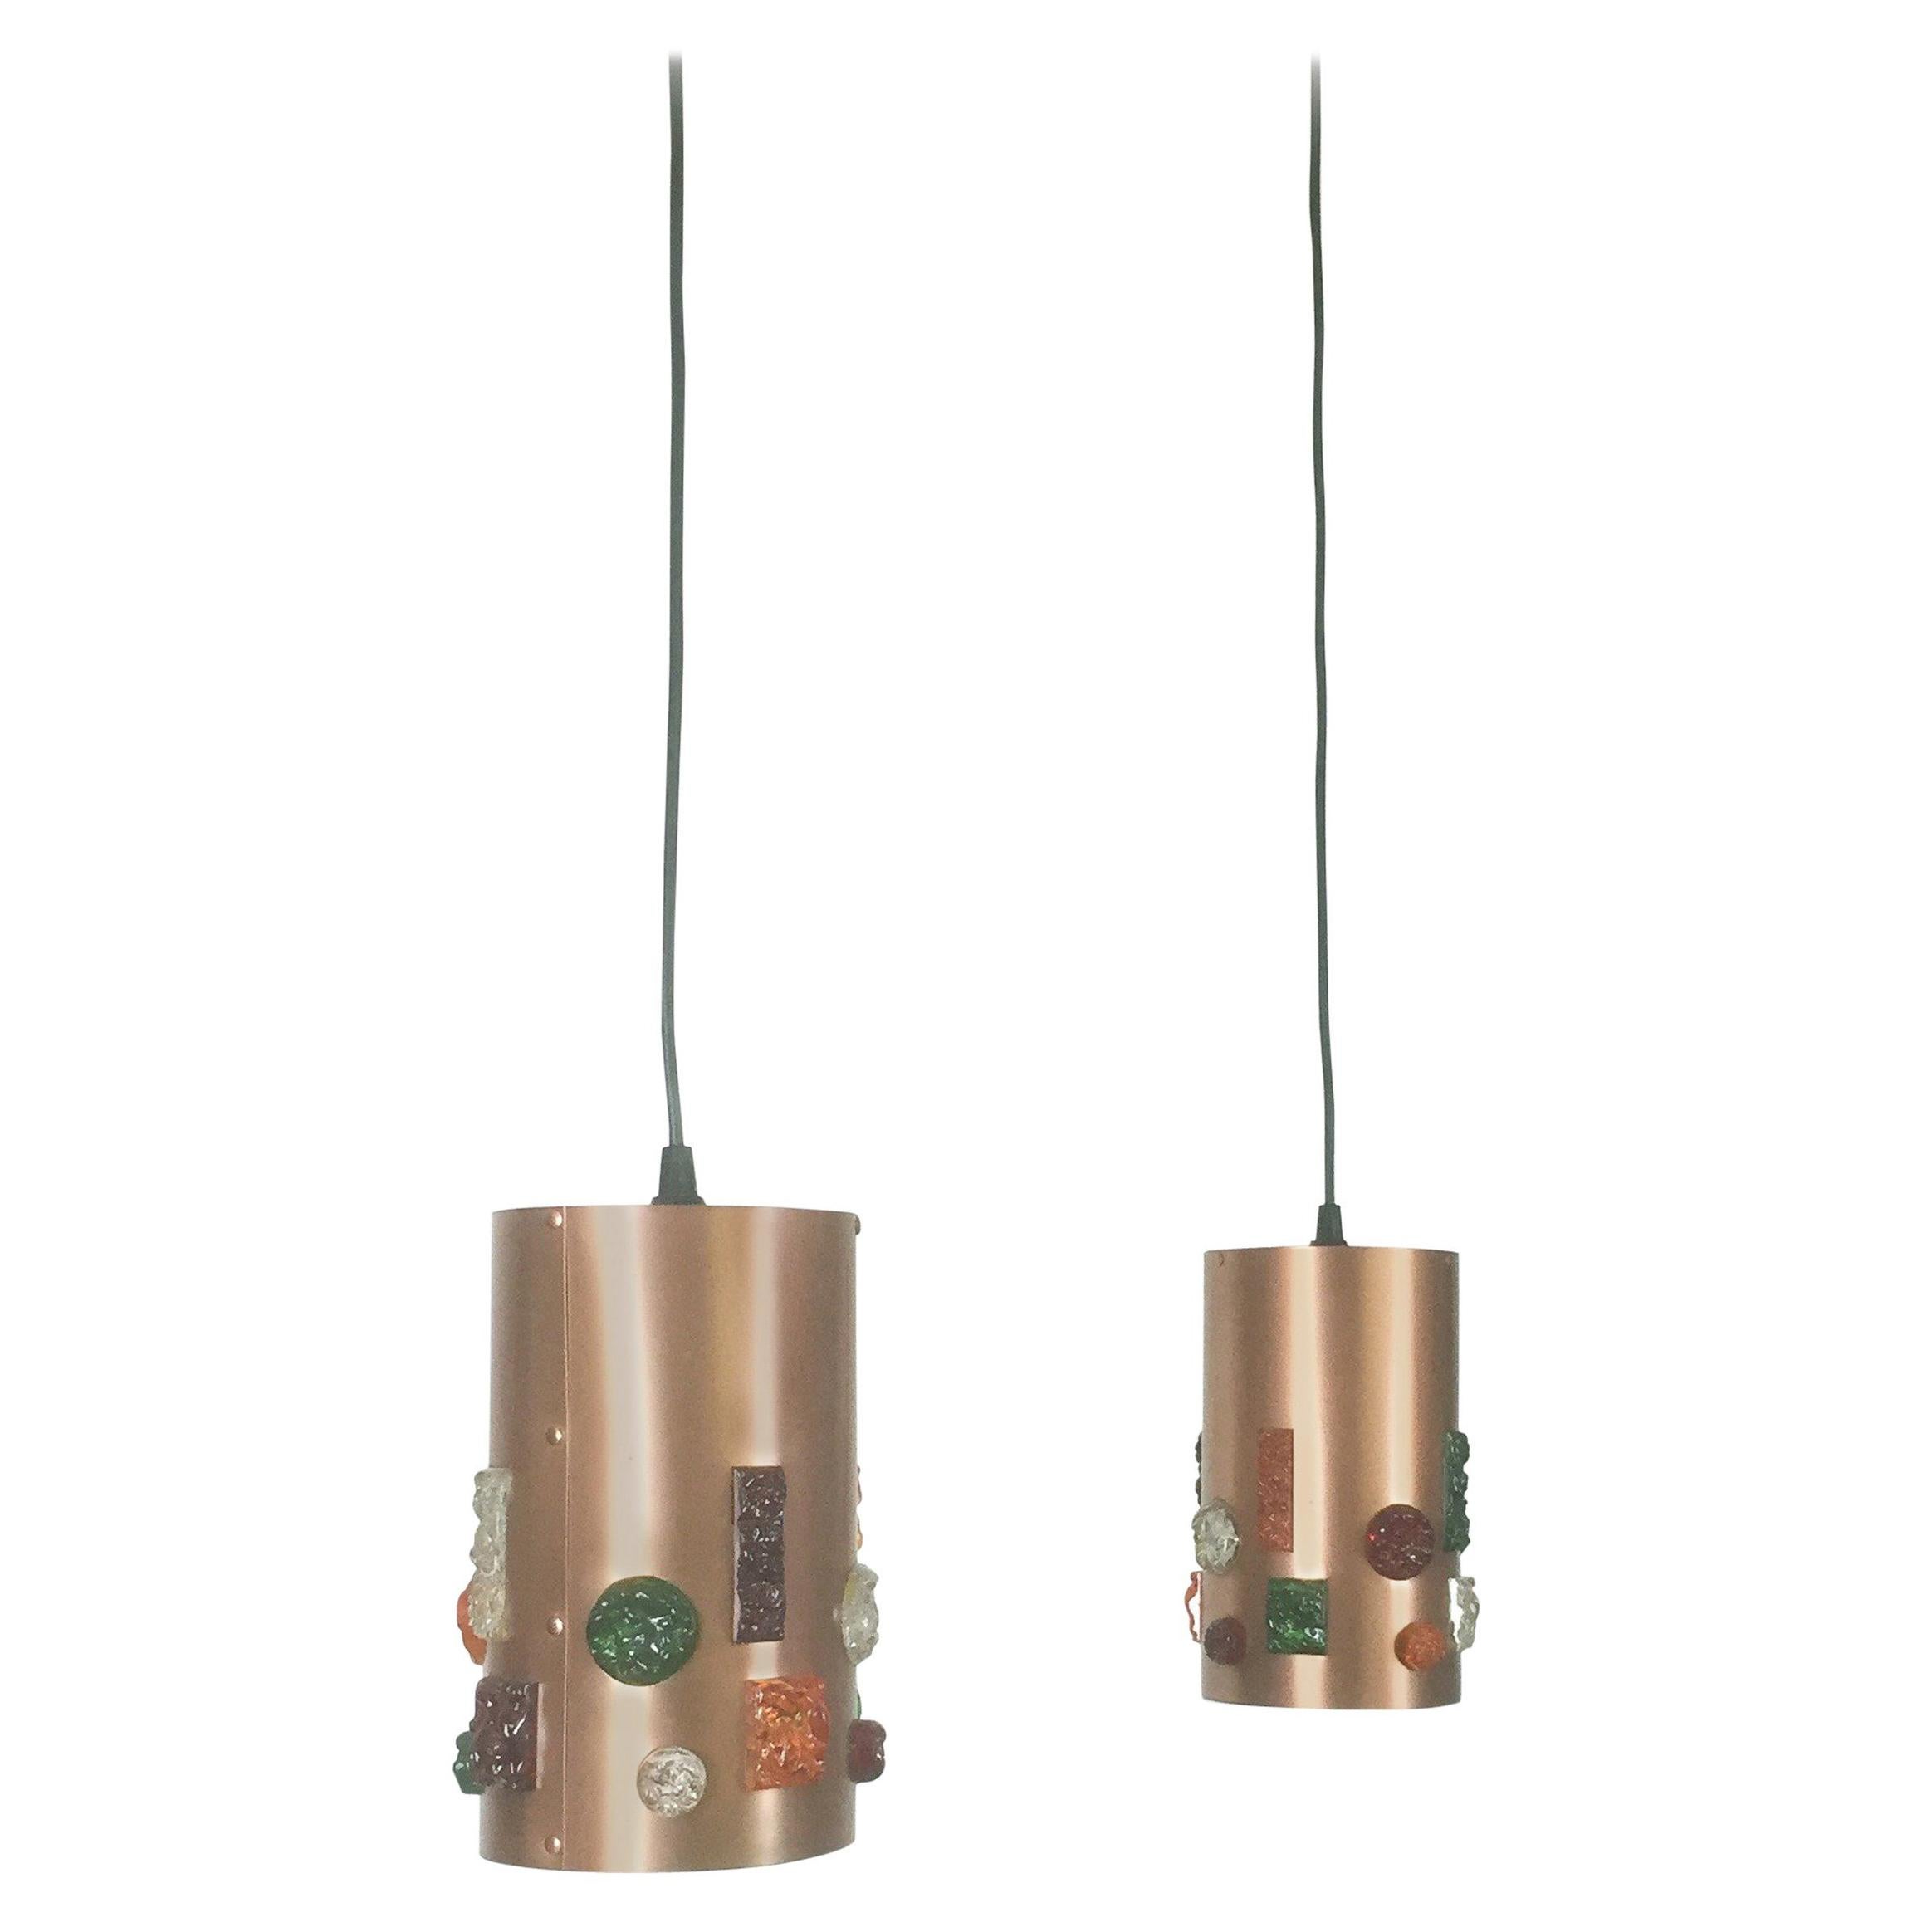 Set of Two Original German Copper Hanging Light, Germany, 1970s For Sale